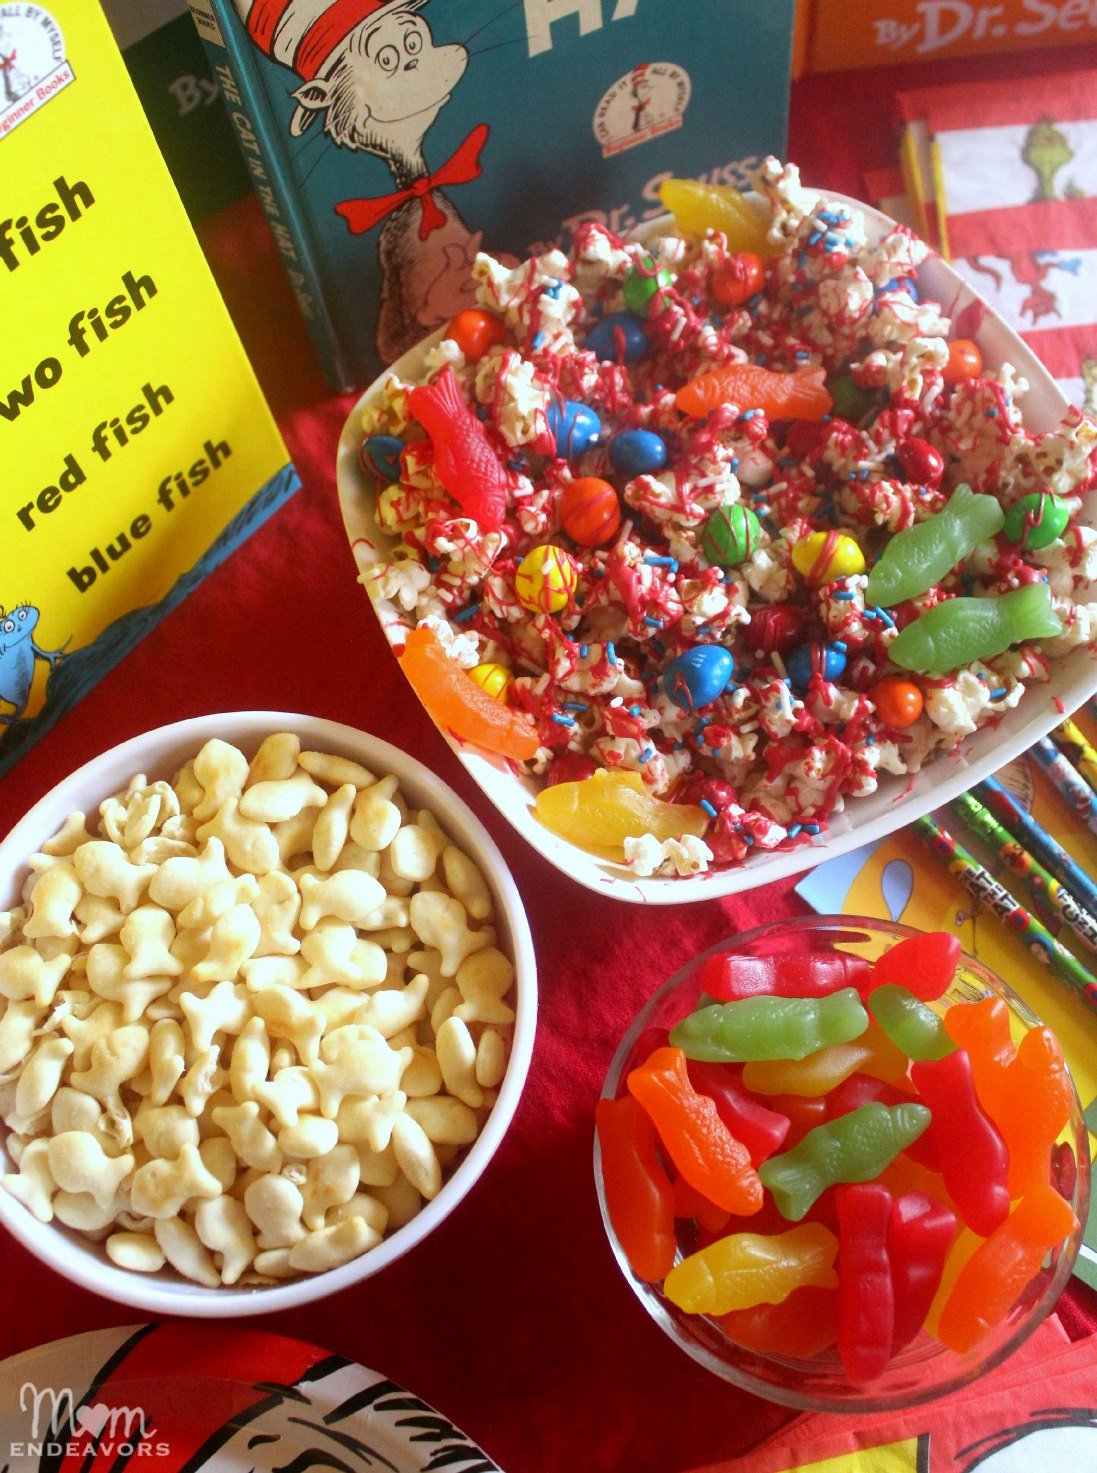 Dr Seuss Party Food Ideas Recipe
 Celebrate Reading with a Dr Seuss Party